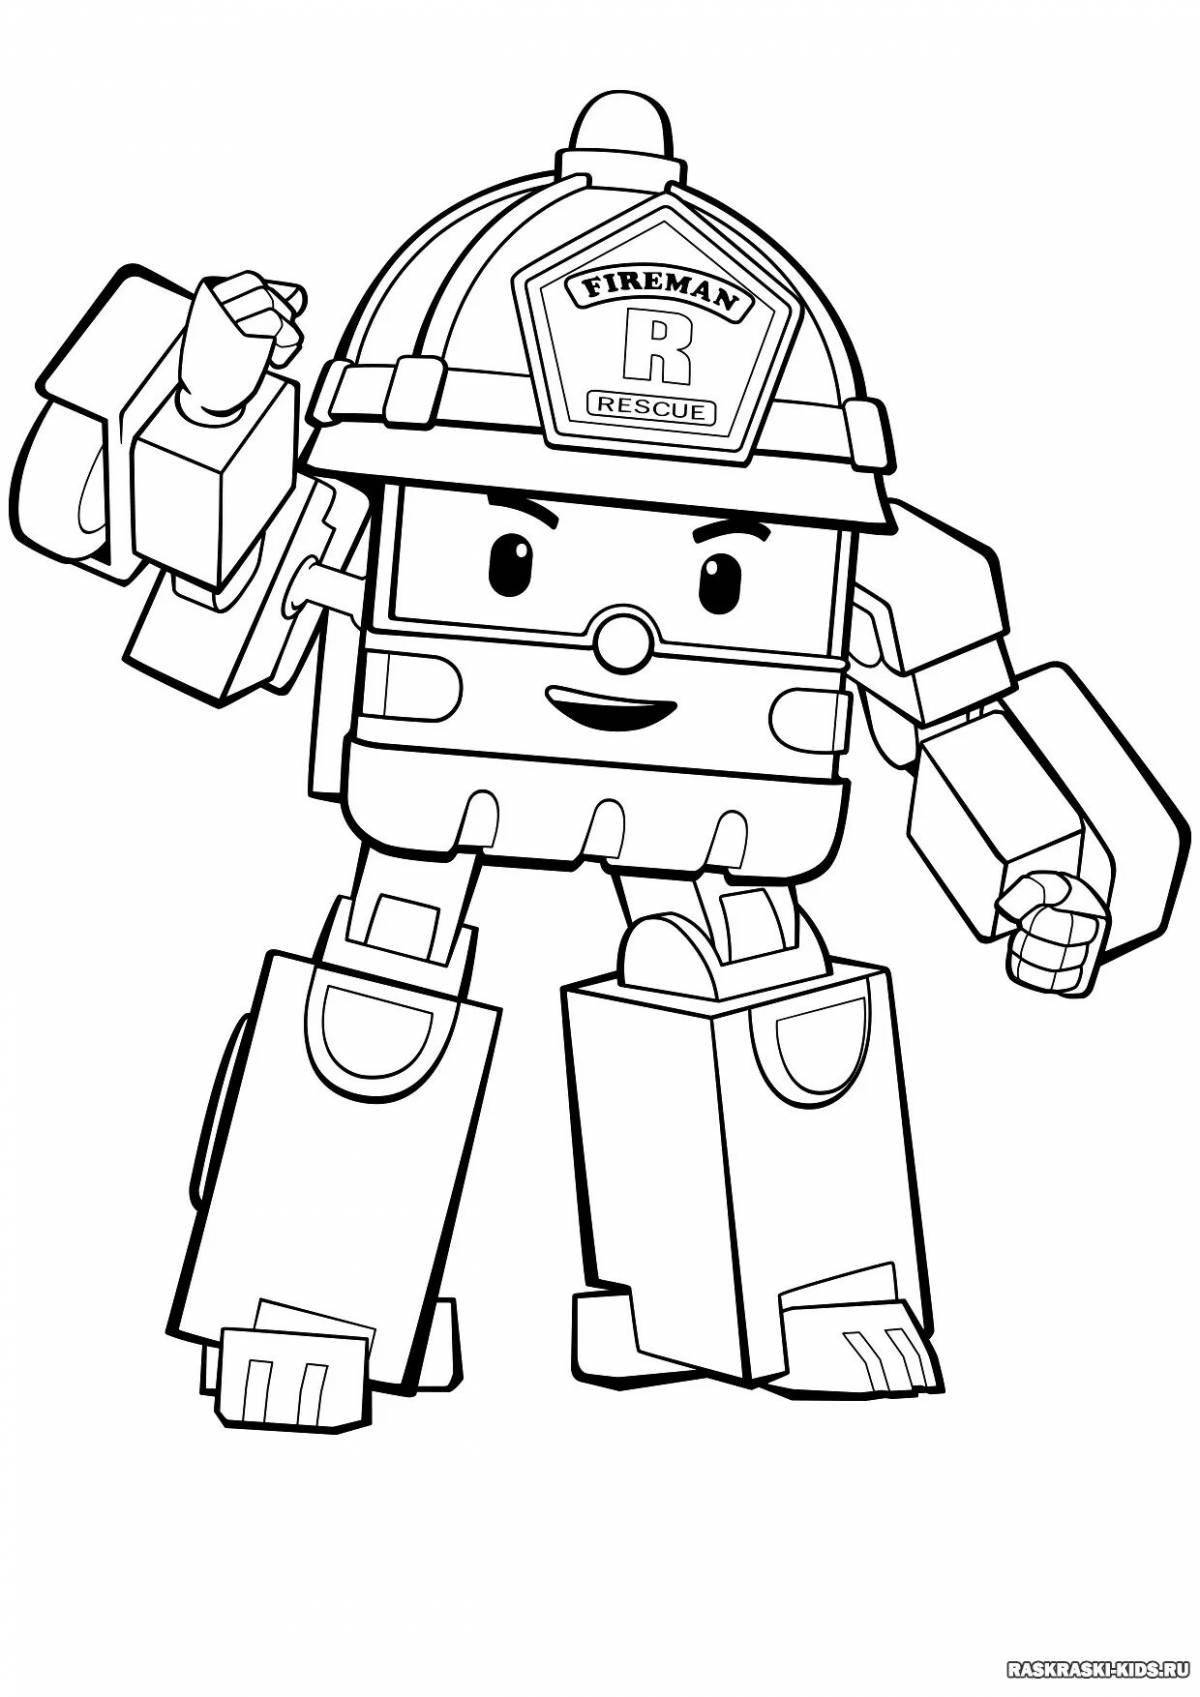 Poly robocar colorful fire truck coloring page